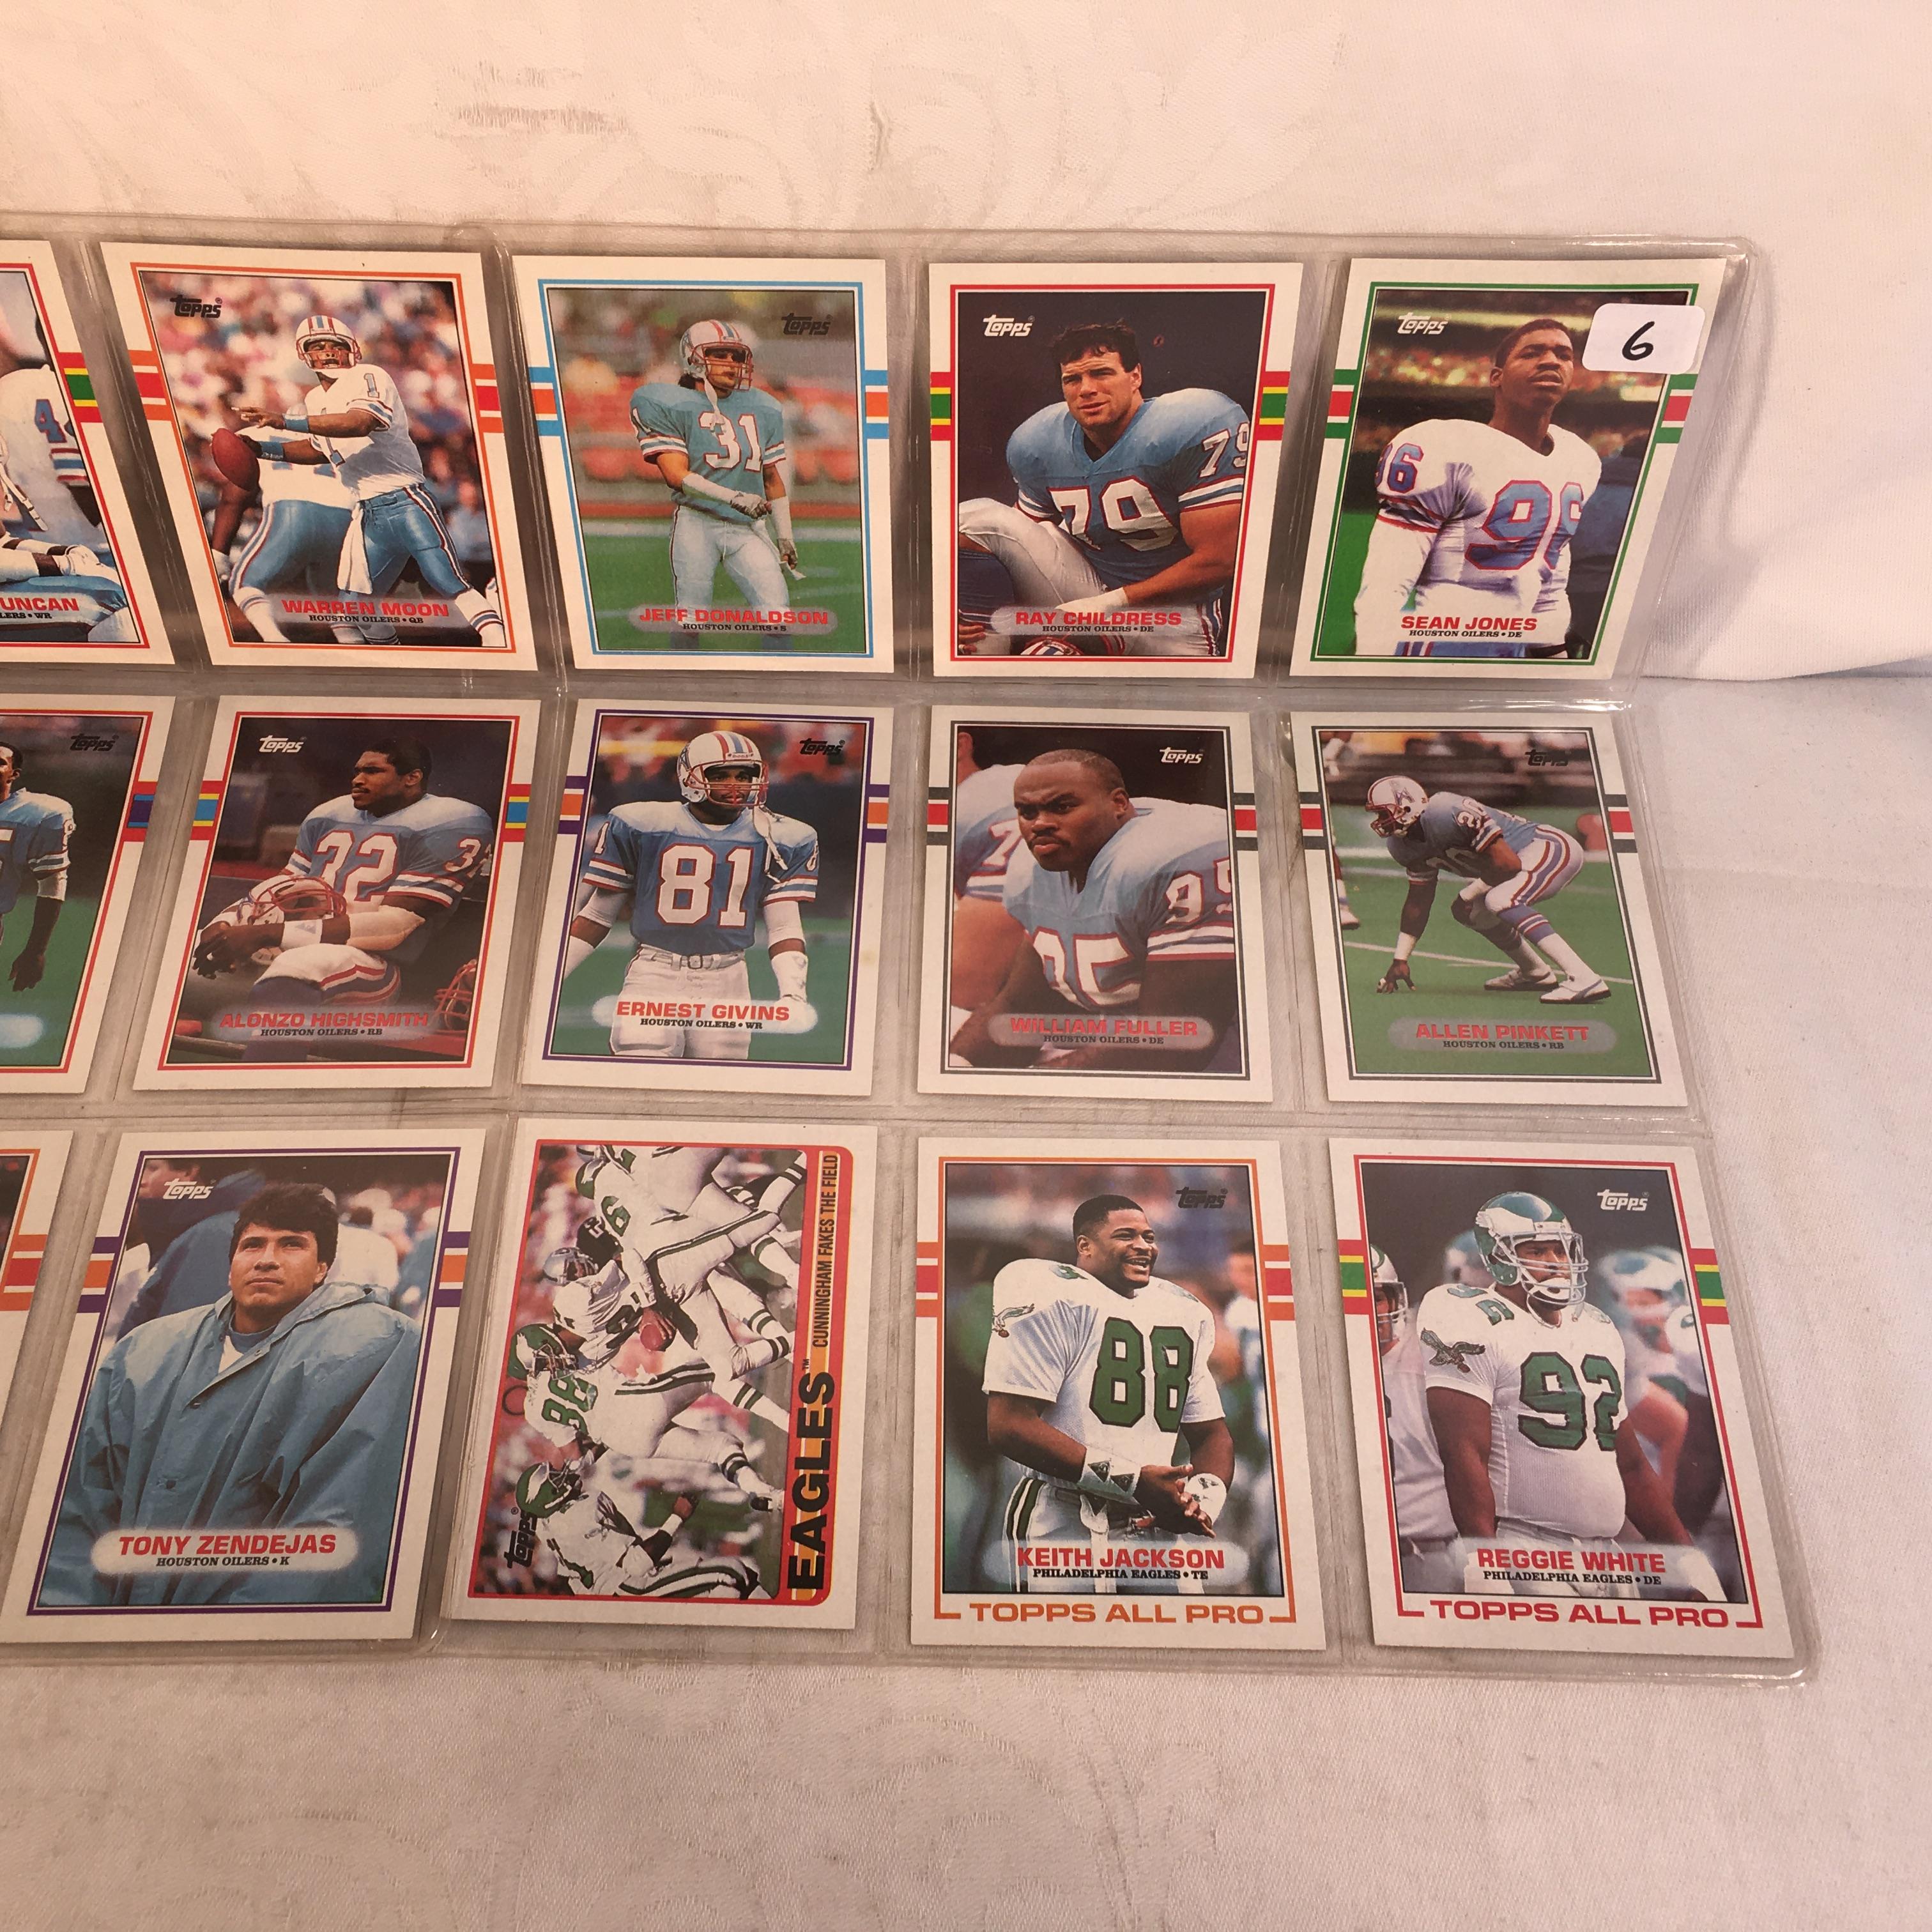 Lot of 18 Pcs Collector Vintage NFL Football Sport Trading Assorted Players & Cards -See Photos